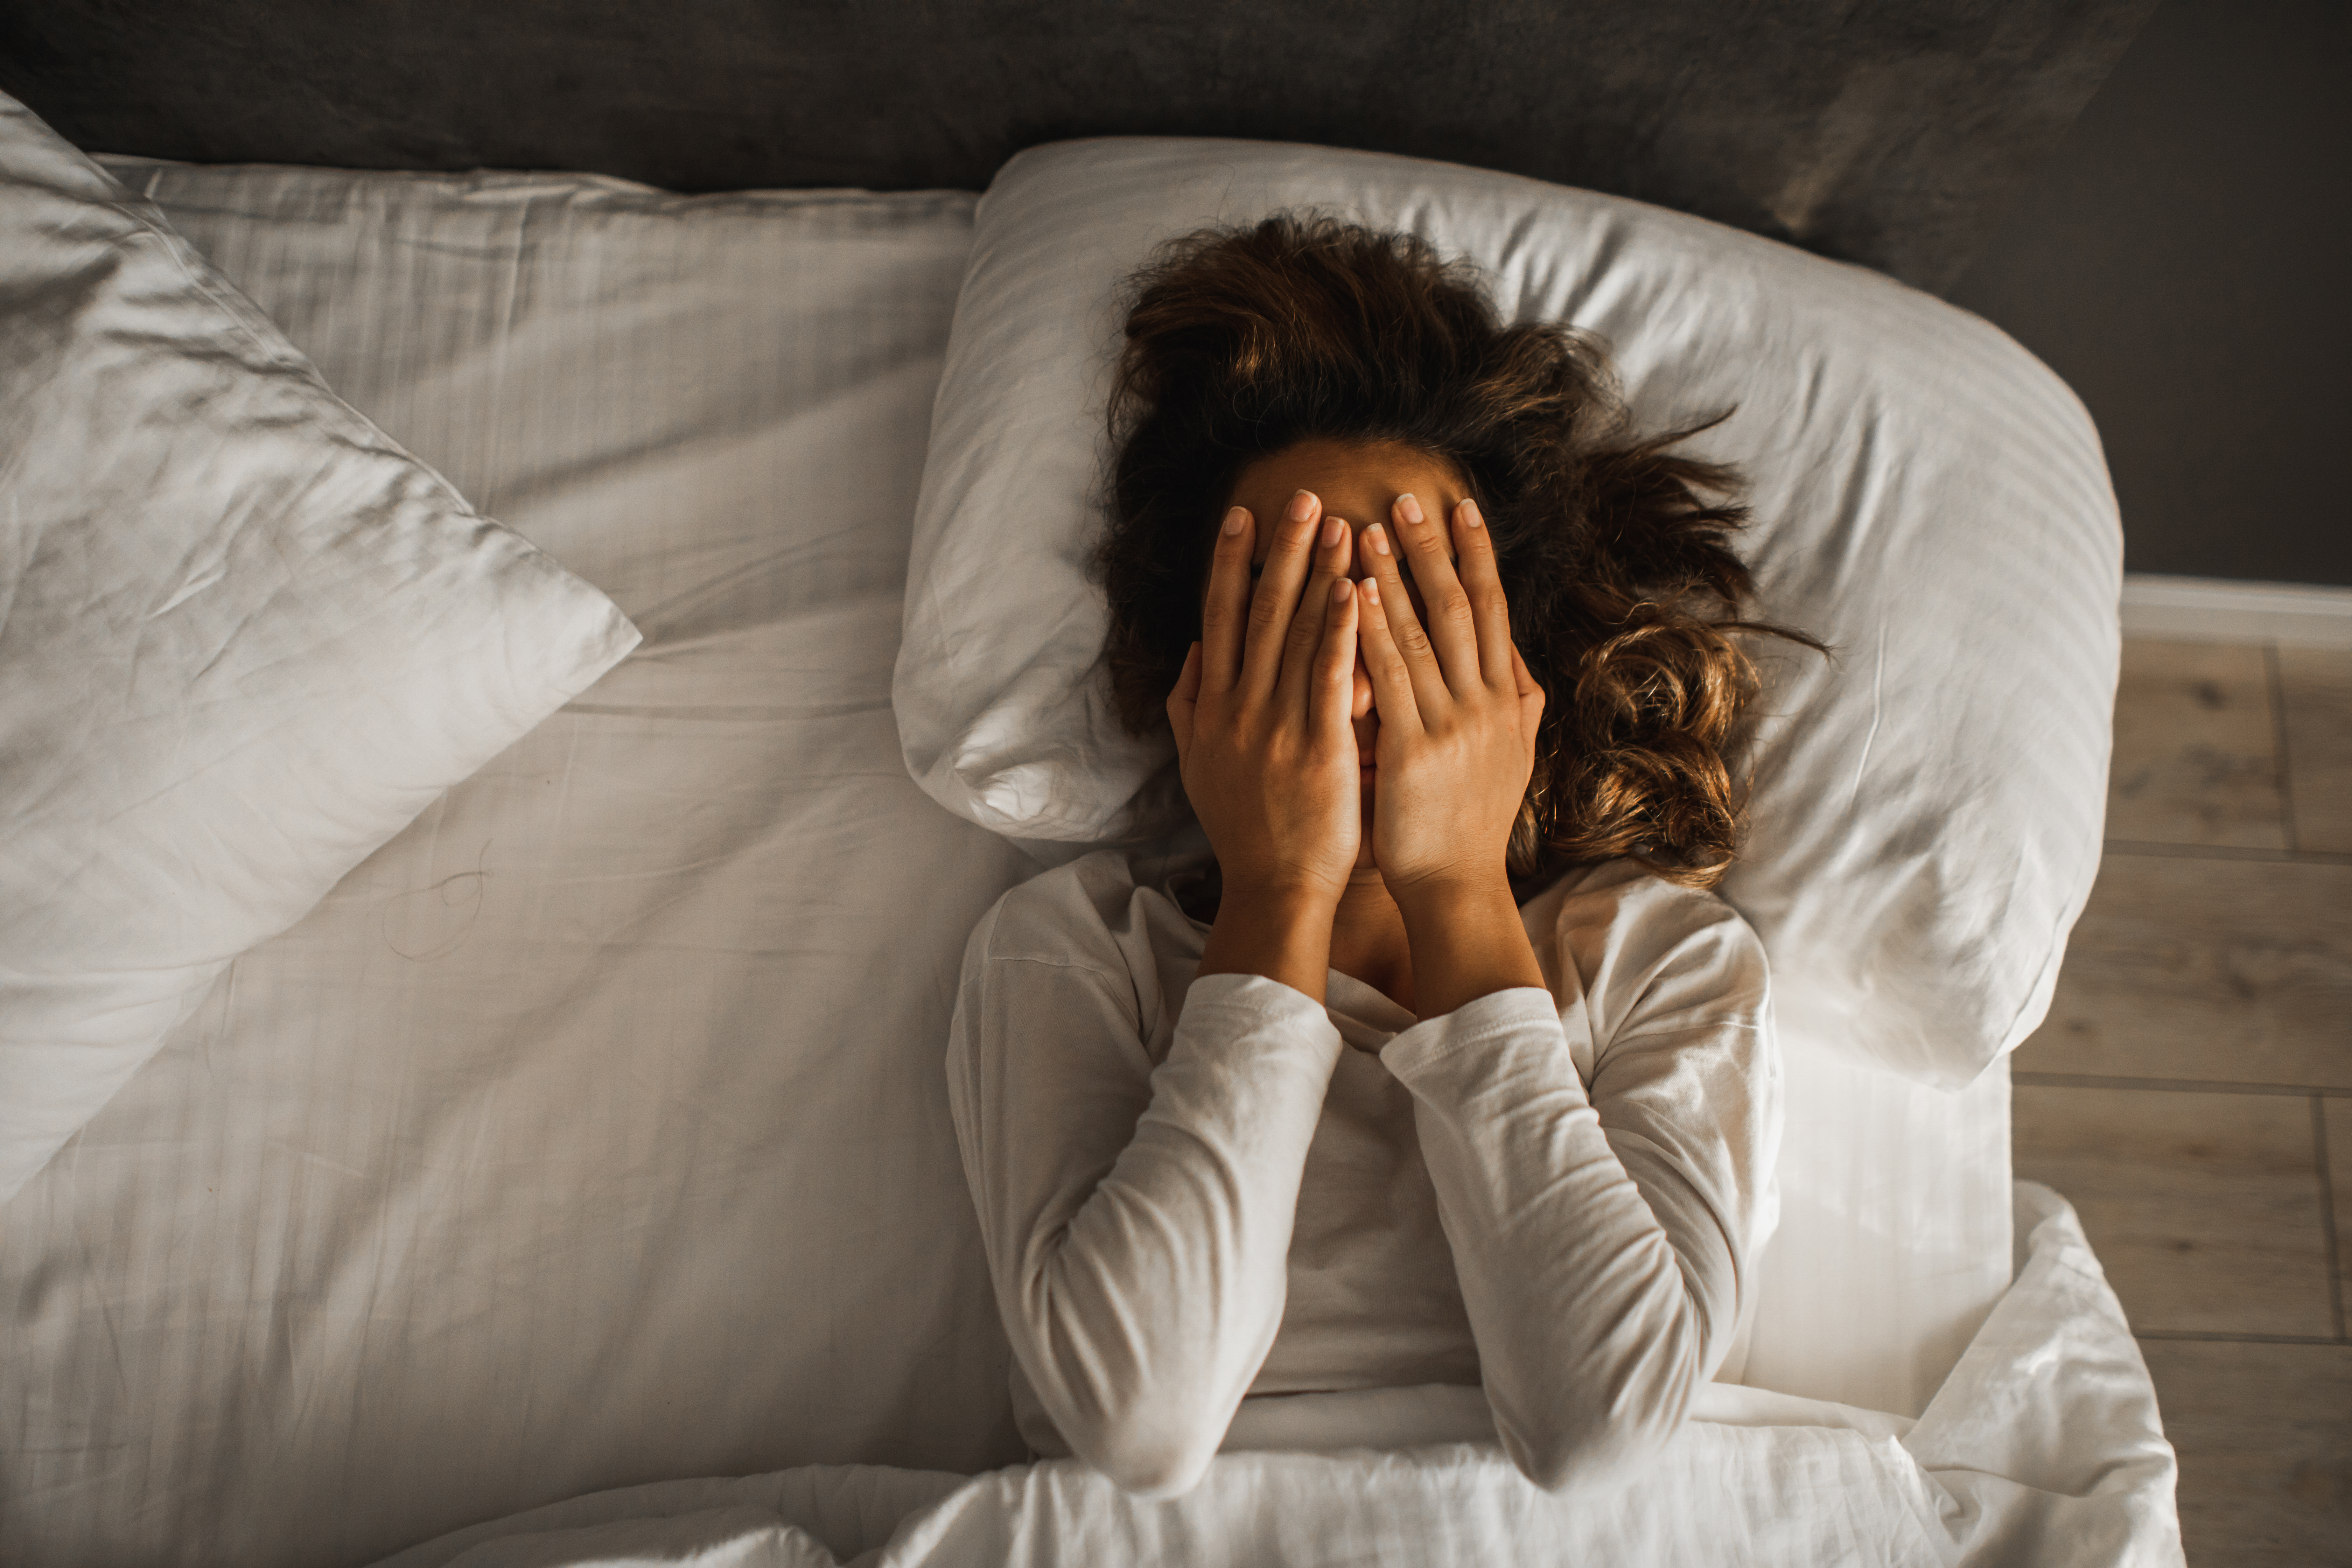 A sad woman in bed | Source: Getty Images